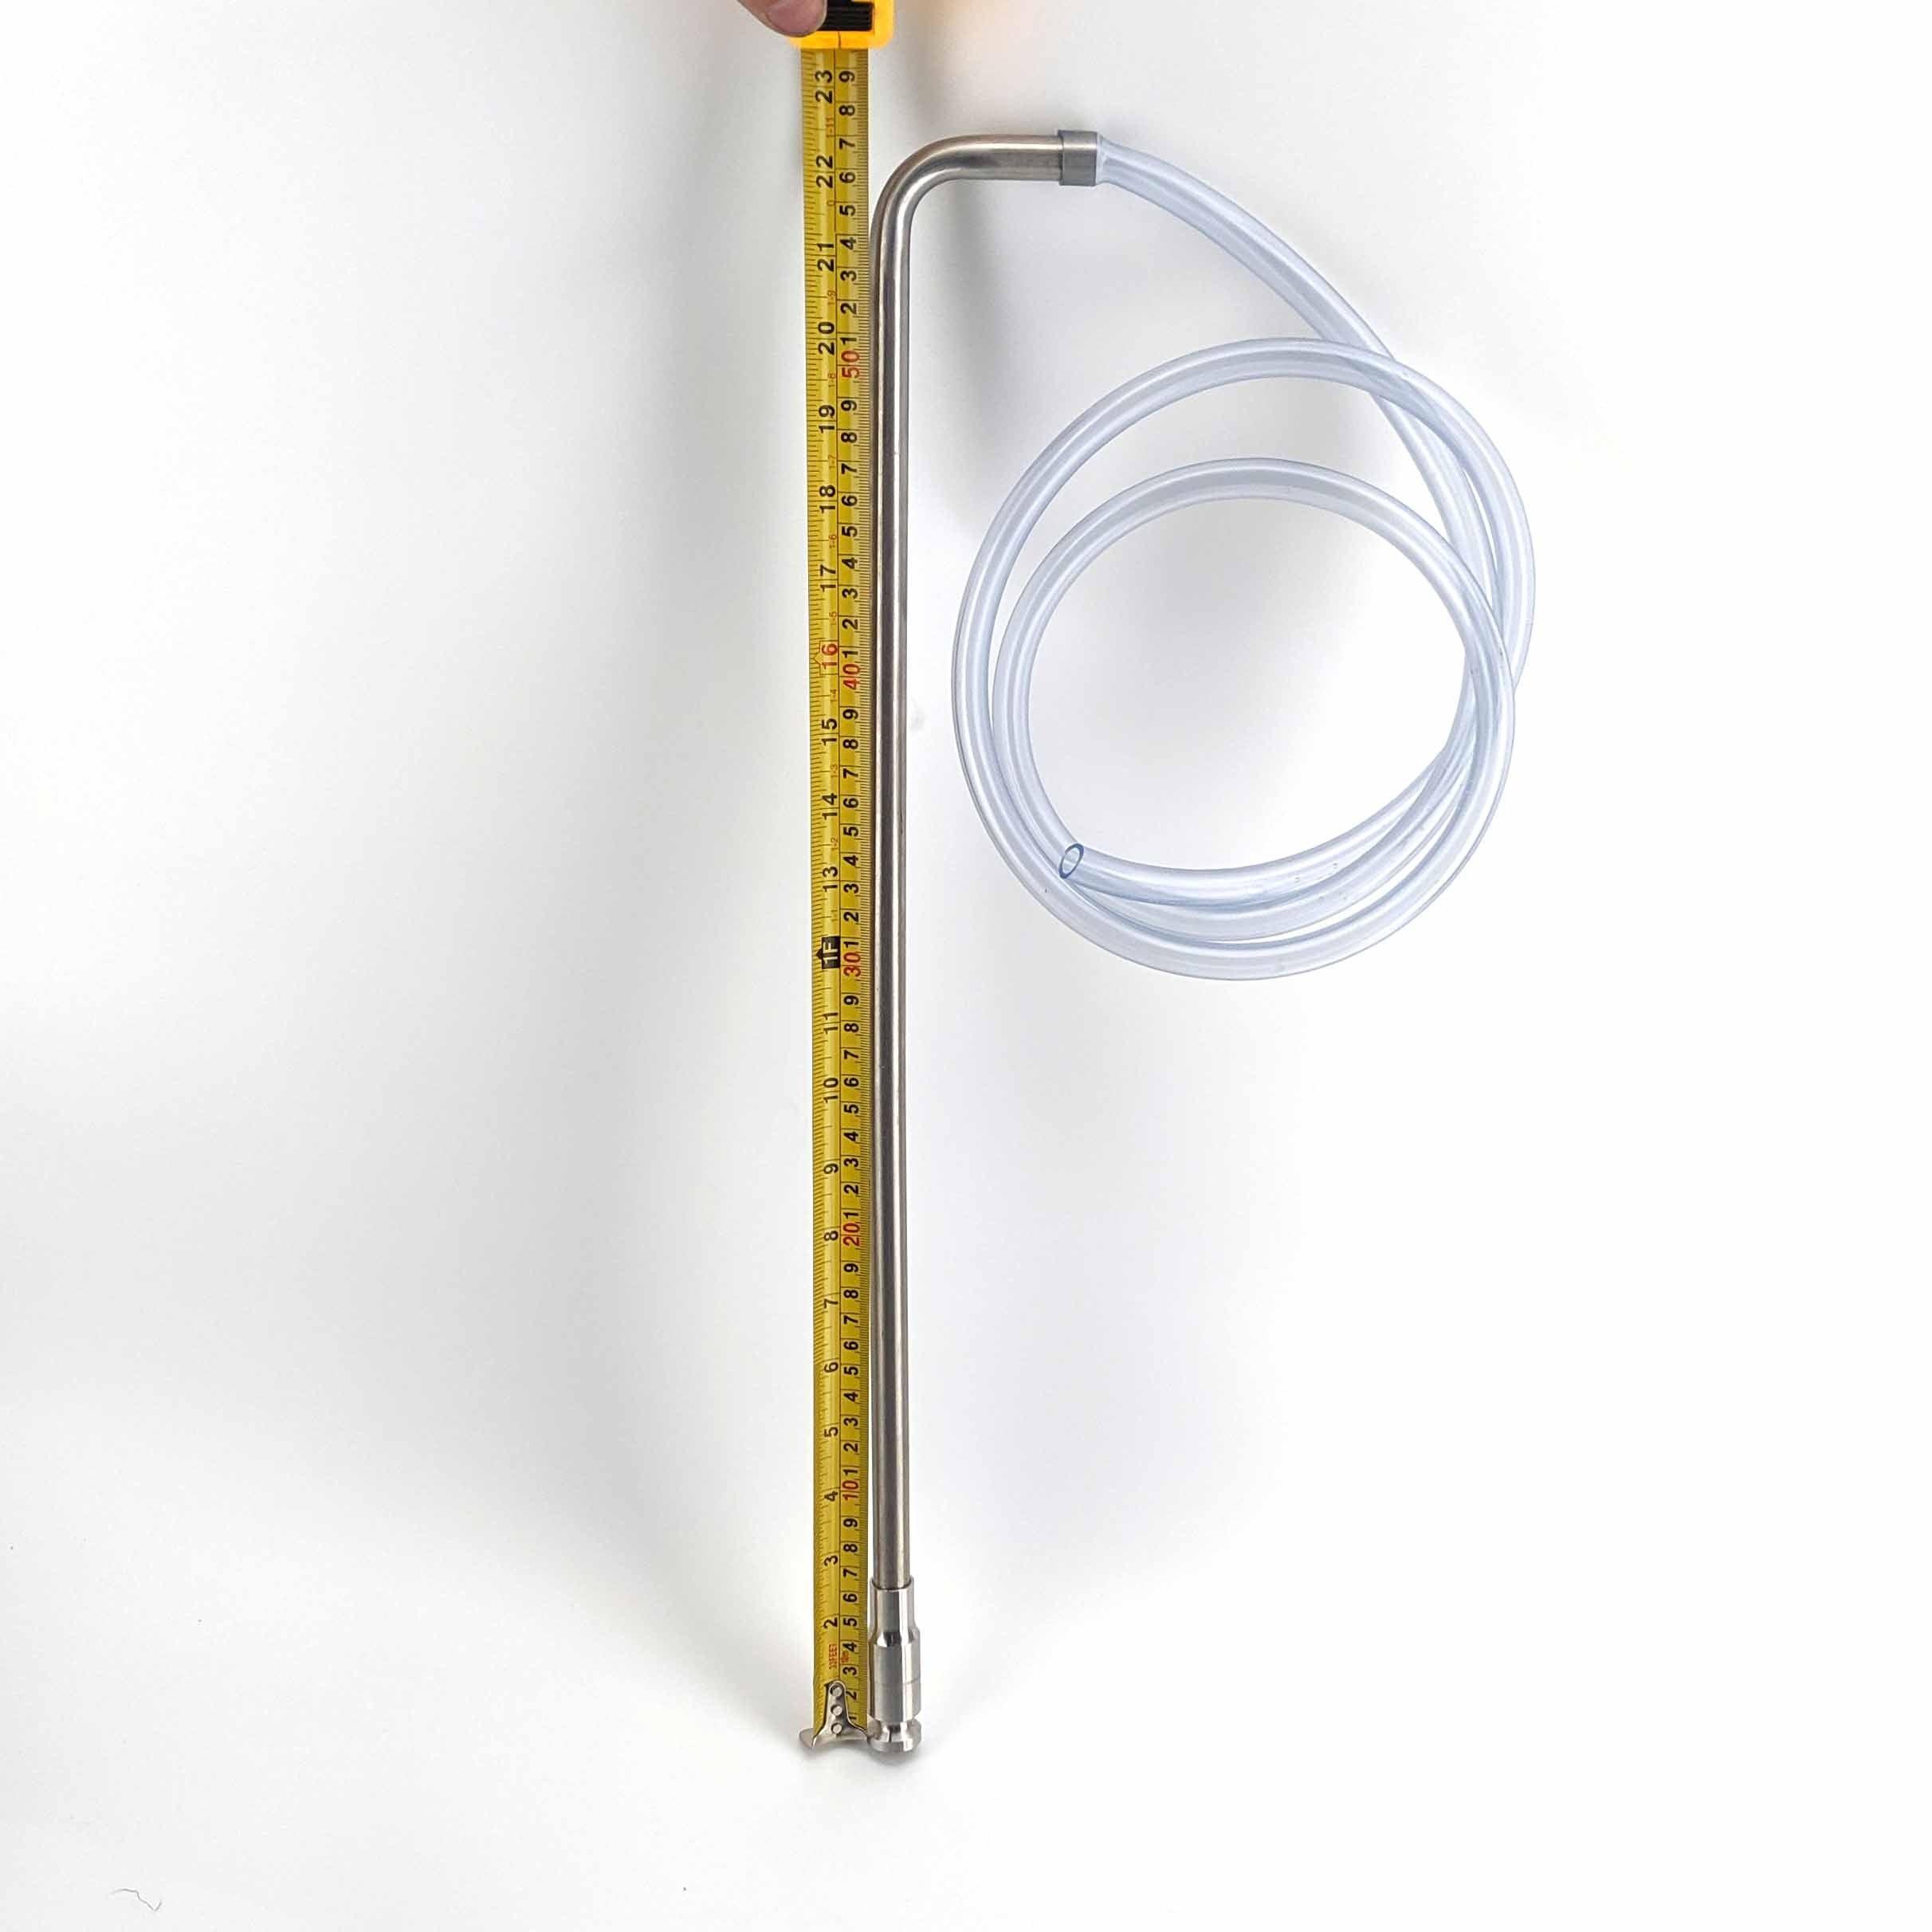 57cm Stainless Siphon with 1.5m Heavy Duty Silicone Tube (10mm ID) - KegLand